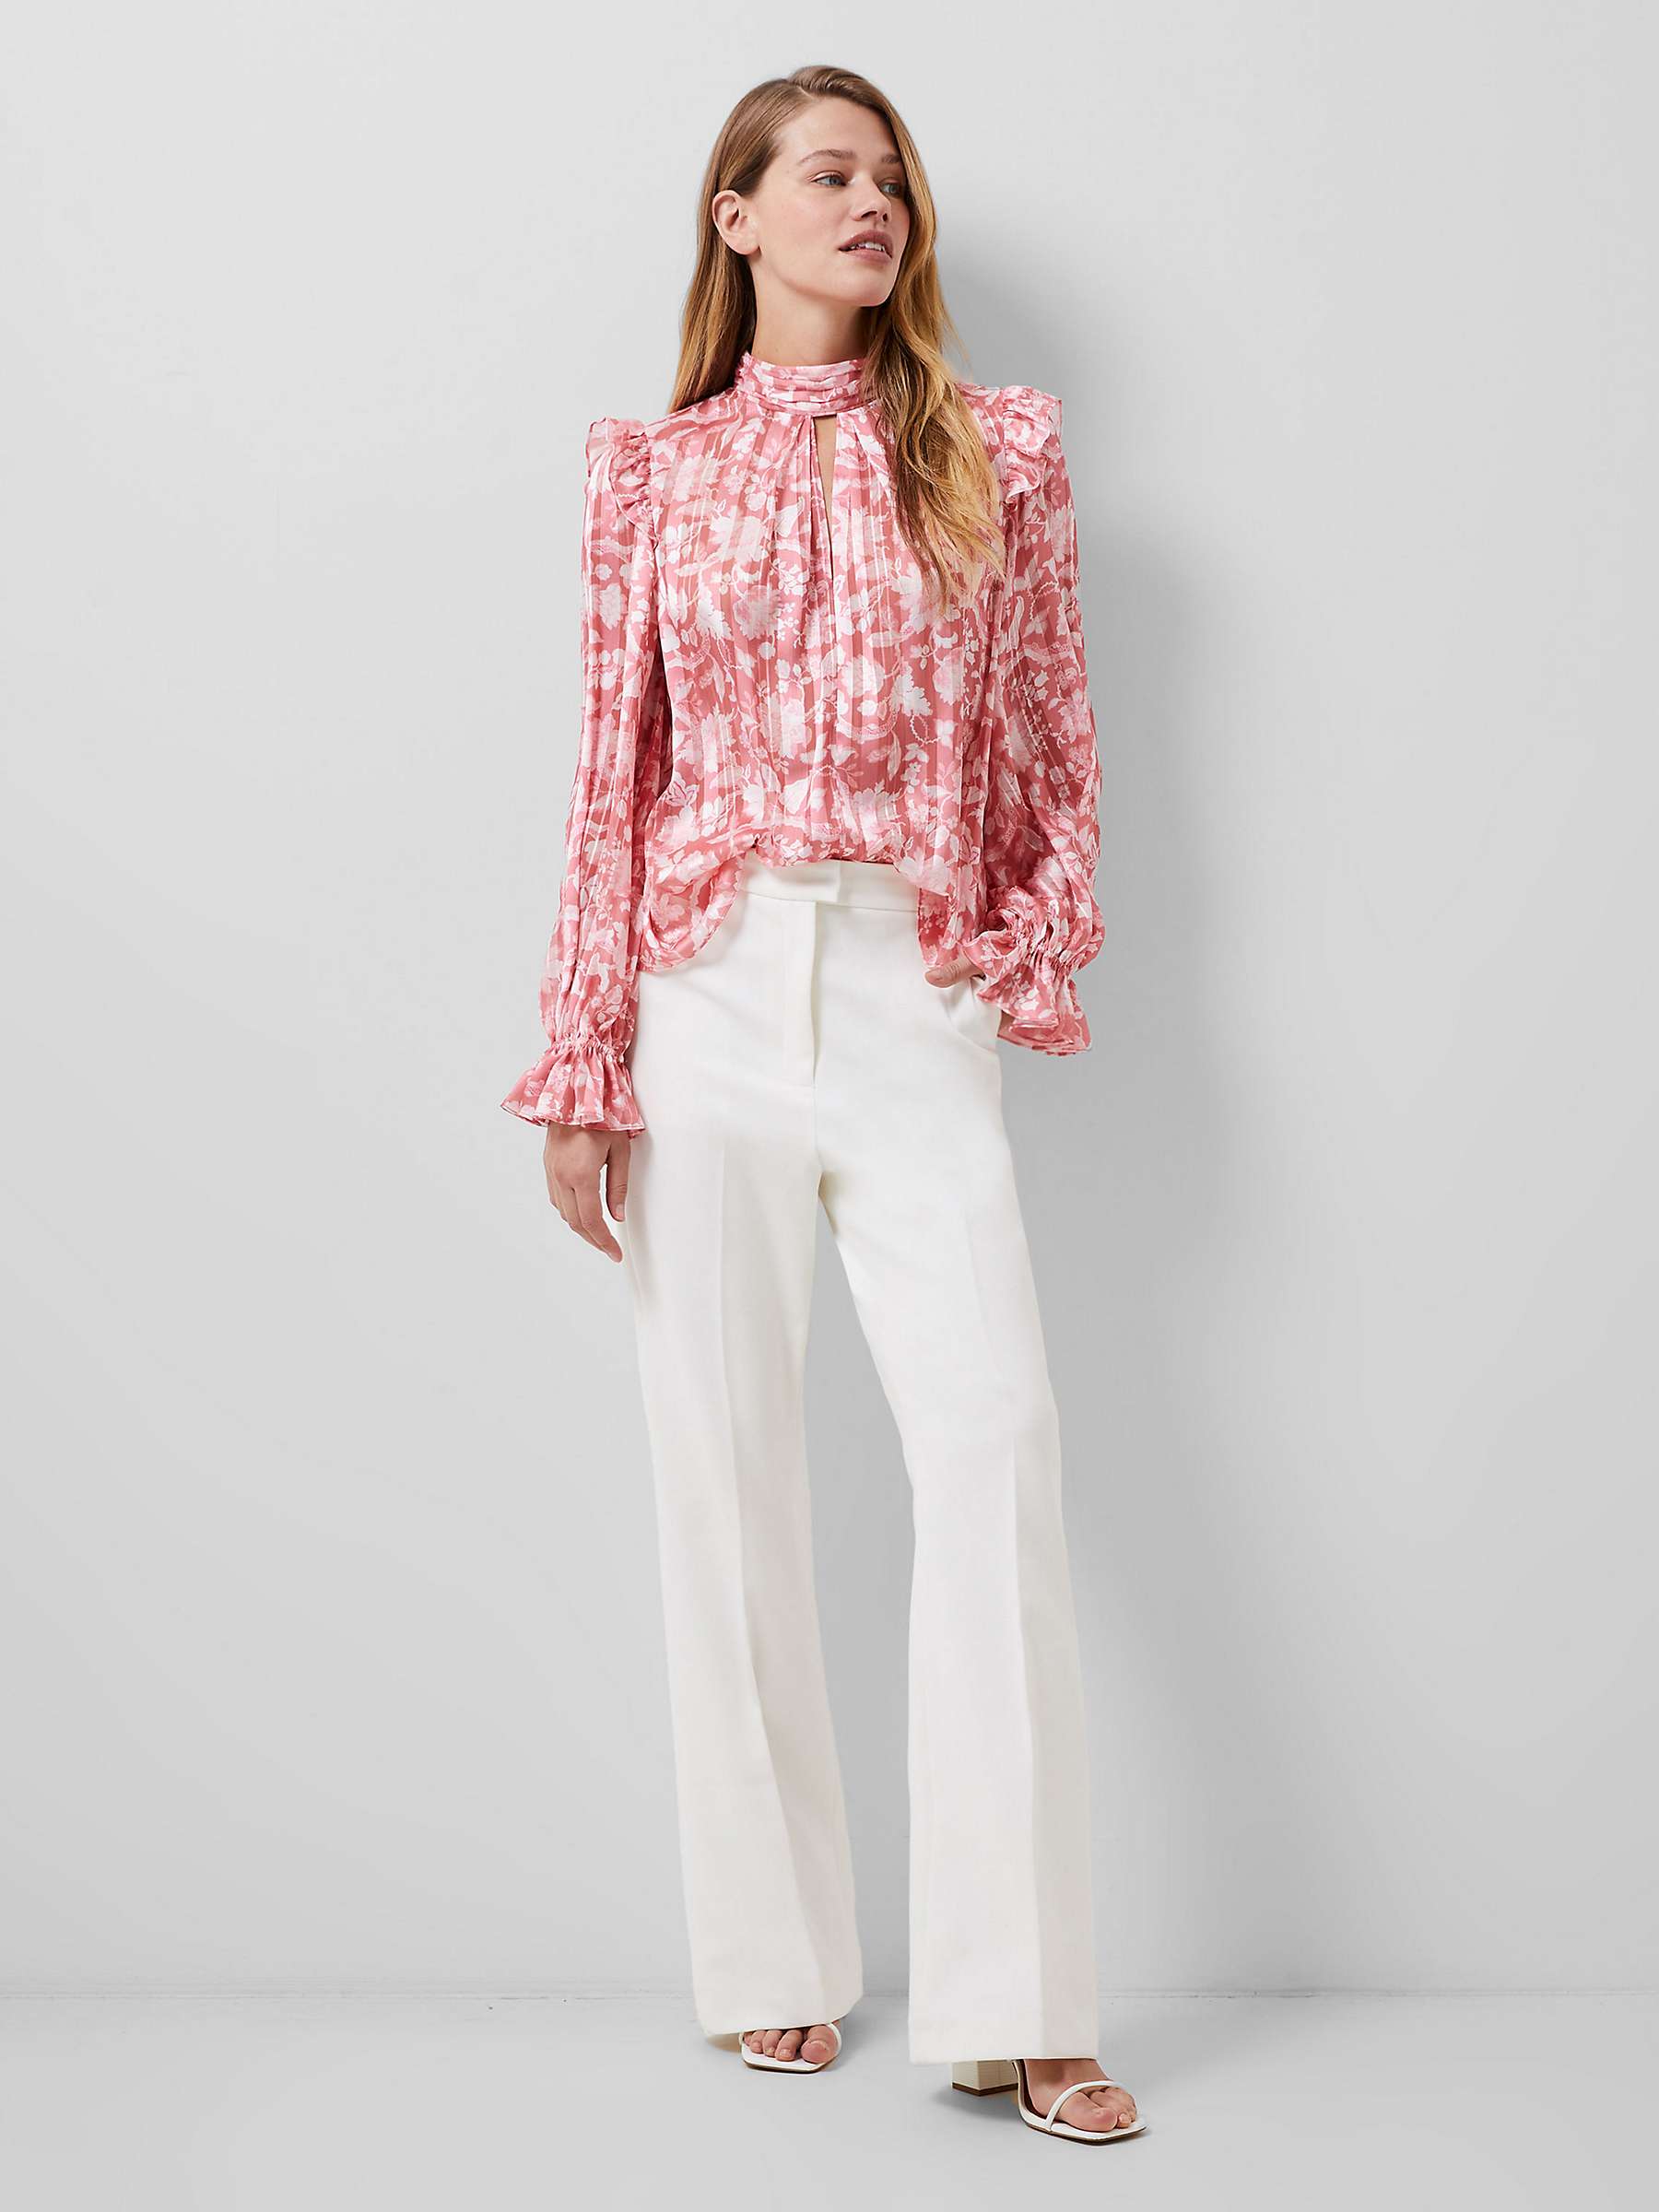 Buy French Connection Cynthia Fauna Blouse Online at johnlewis.com